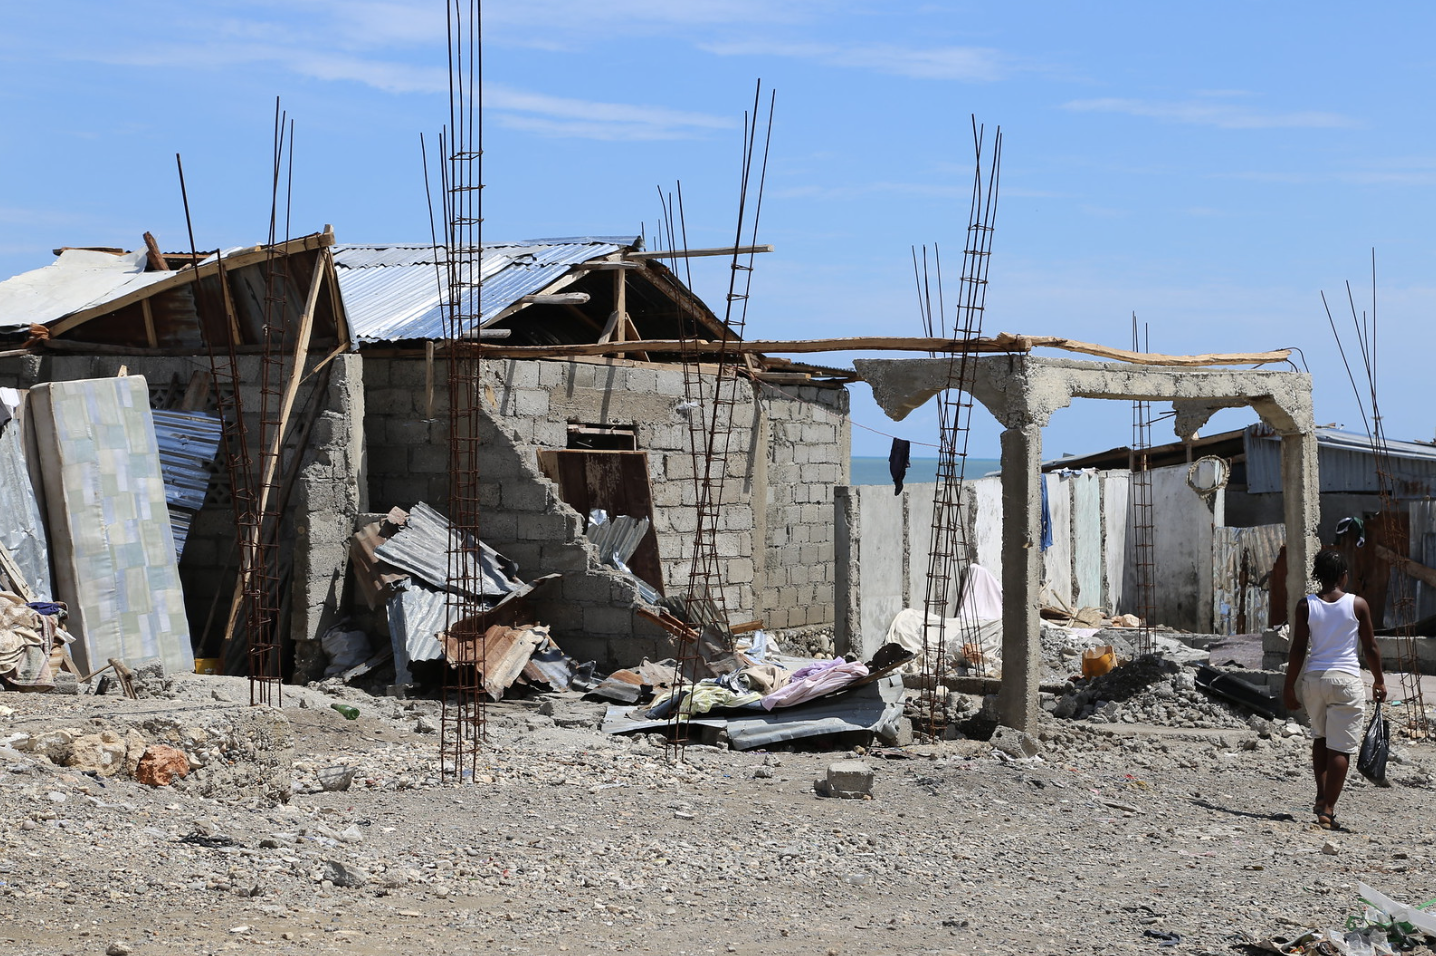 Hurricane Matthew did great damage to the coastal town of Jérémie, Haiti. Some of the worst hit areas were coastal communities like this one. October 14, 2016 (Photo by Nicole Robicheau, International Federation of Red Cross) Creative Commons license via Flickr